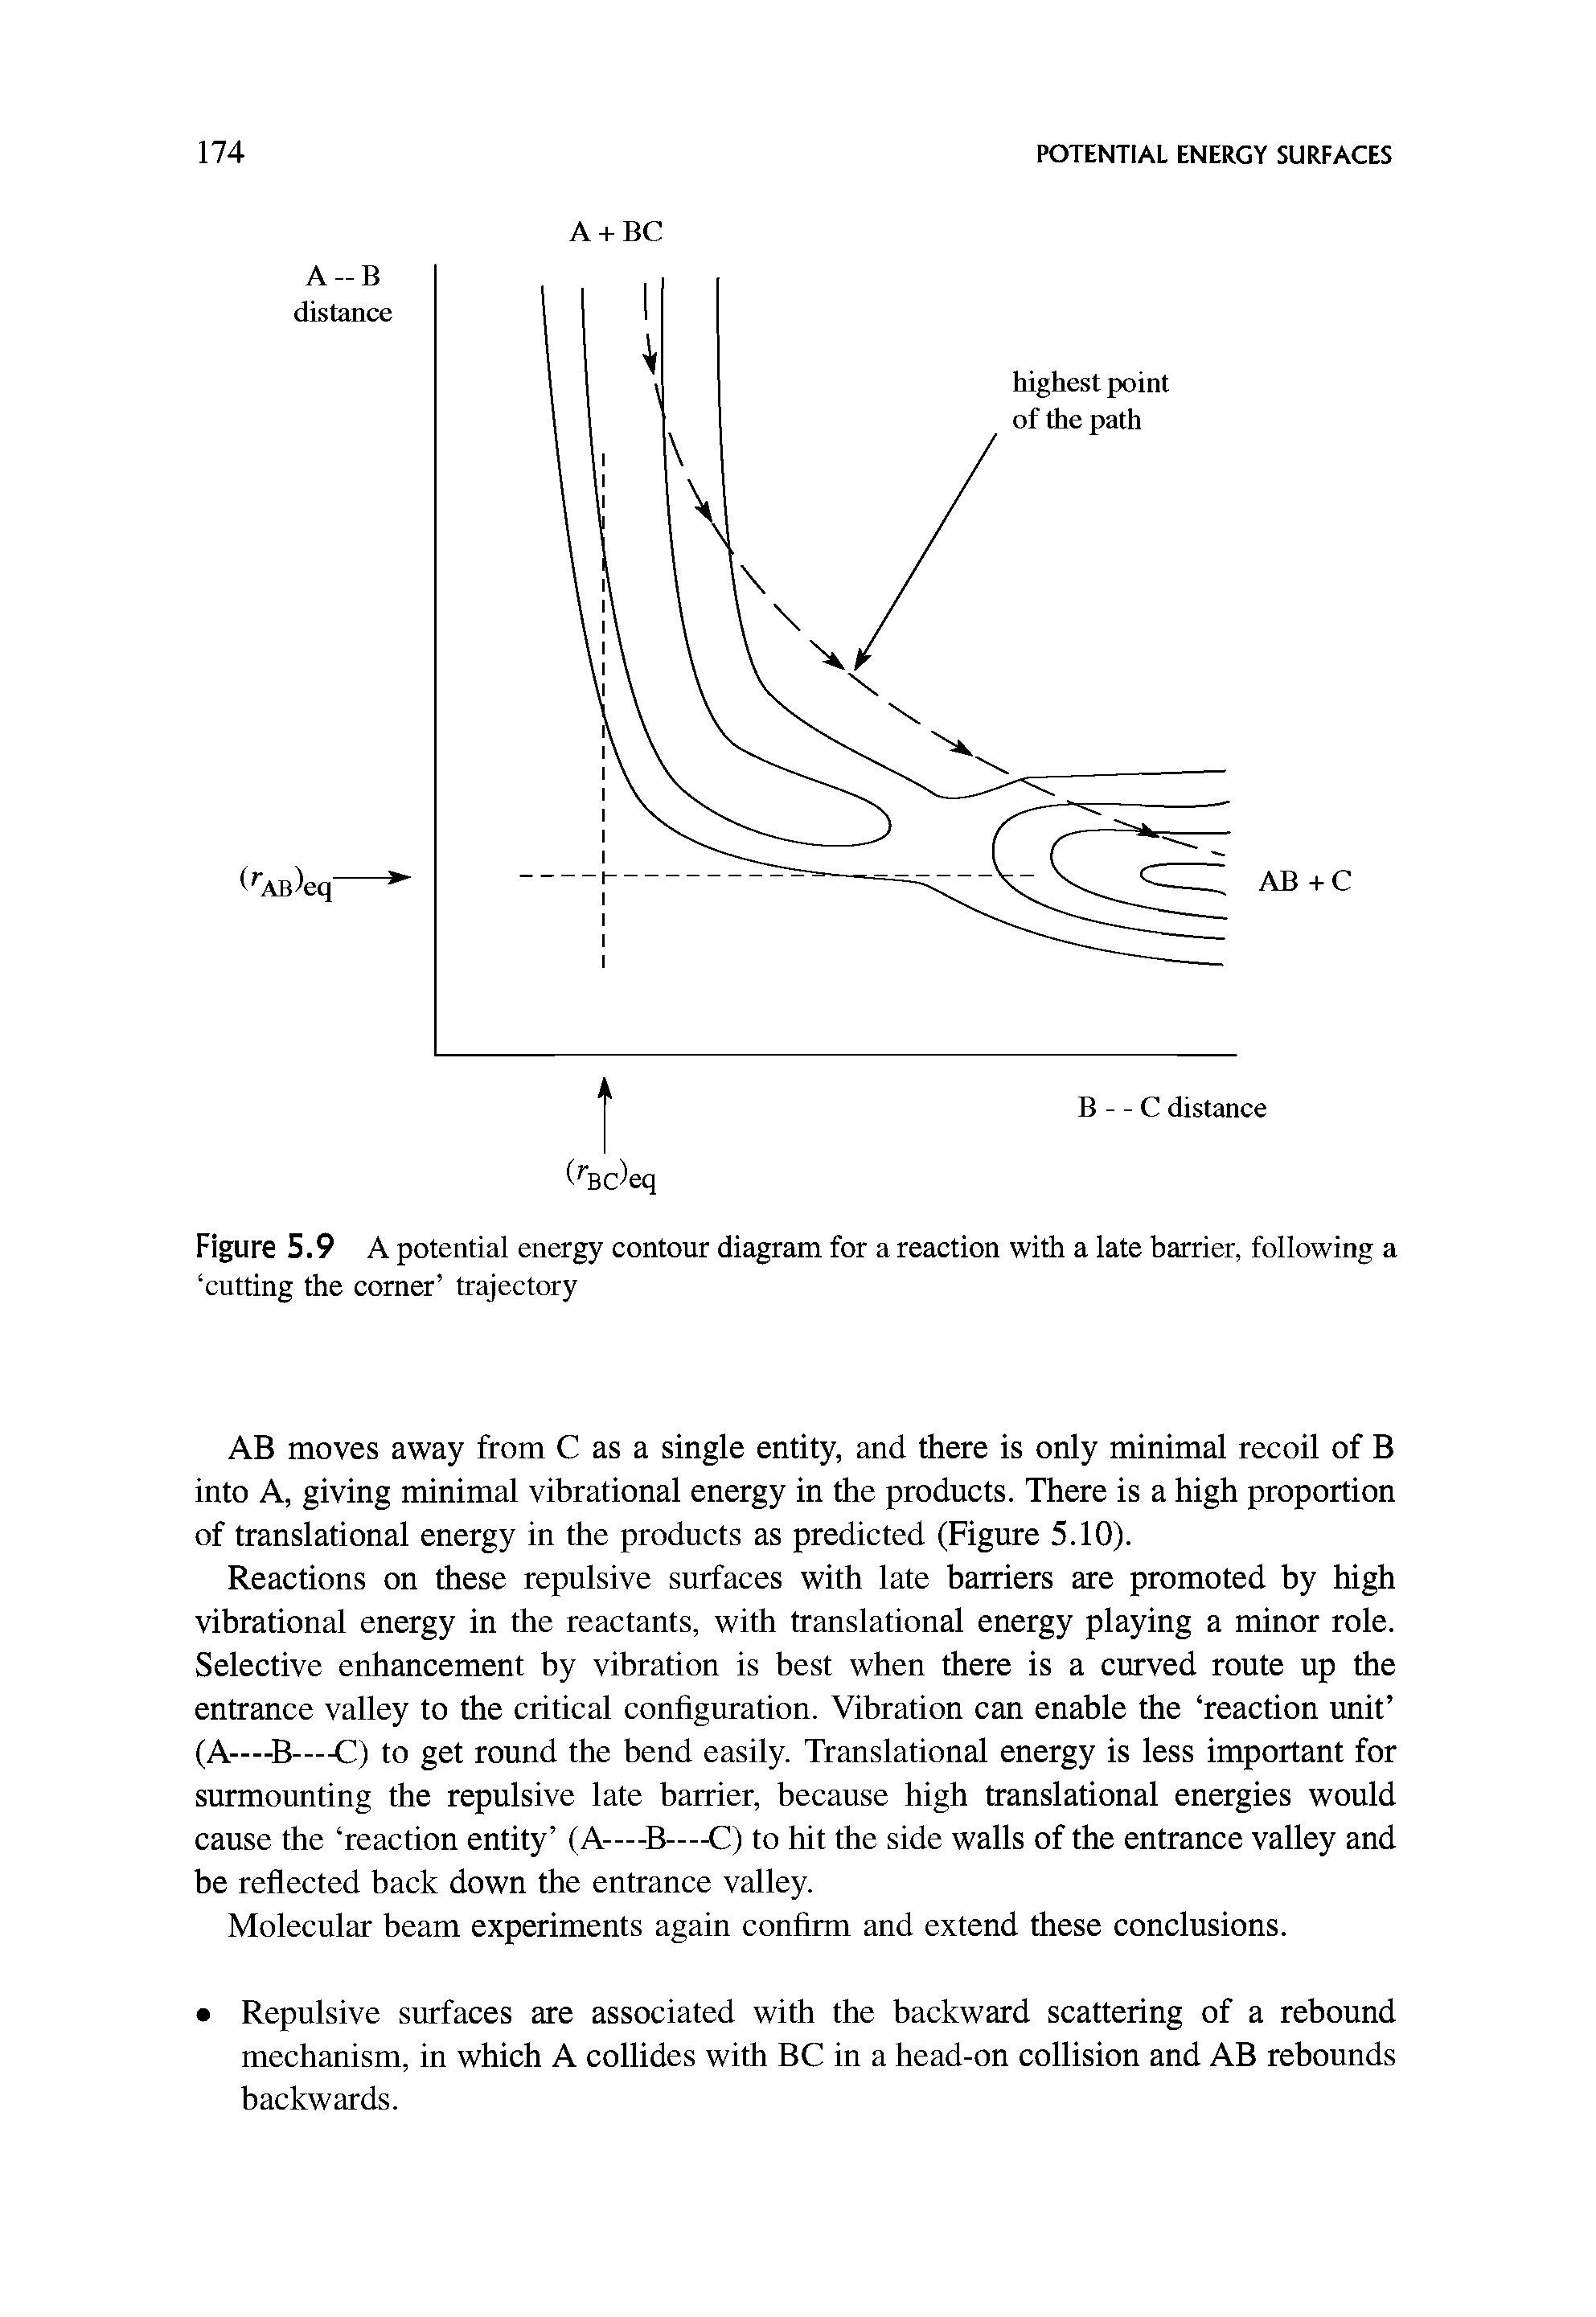 Figure 5.9 A potential energy contour diagram for a reaction with a late barrier, following a cutting the corner trajectory...